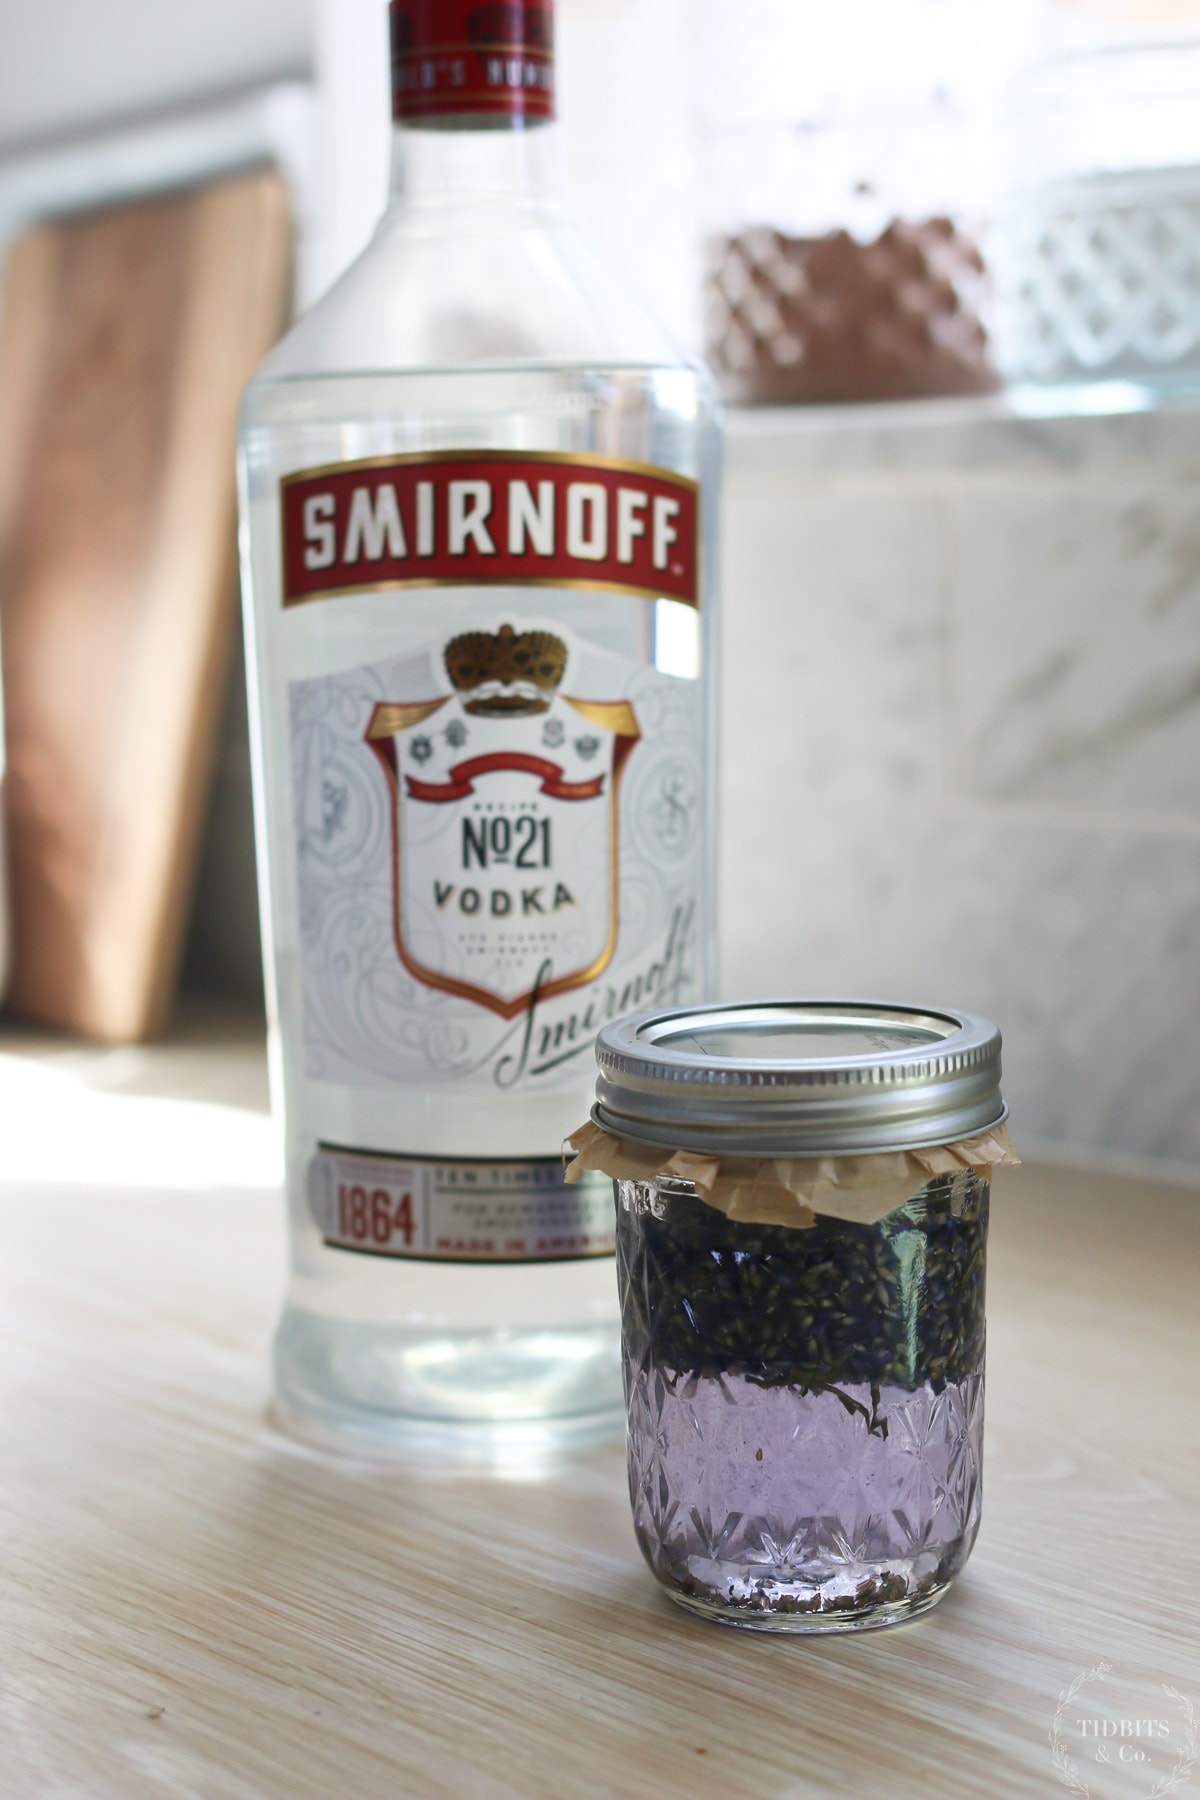 Lavender buds and vodka in a jar for making extract